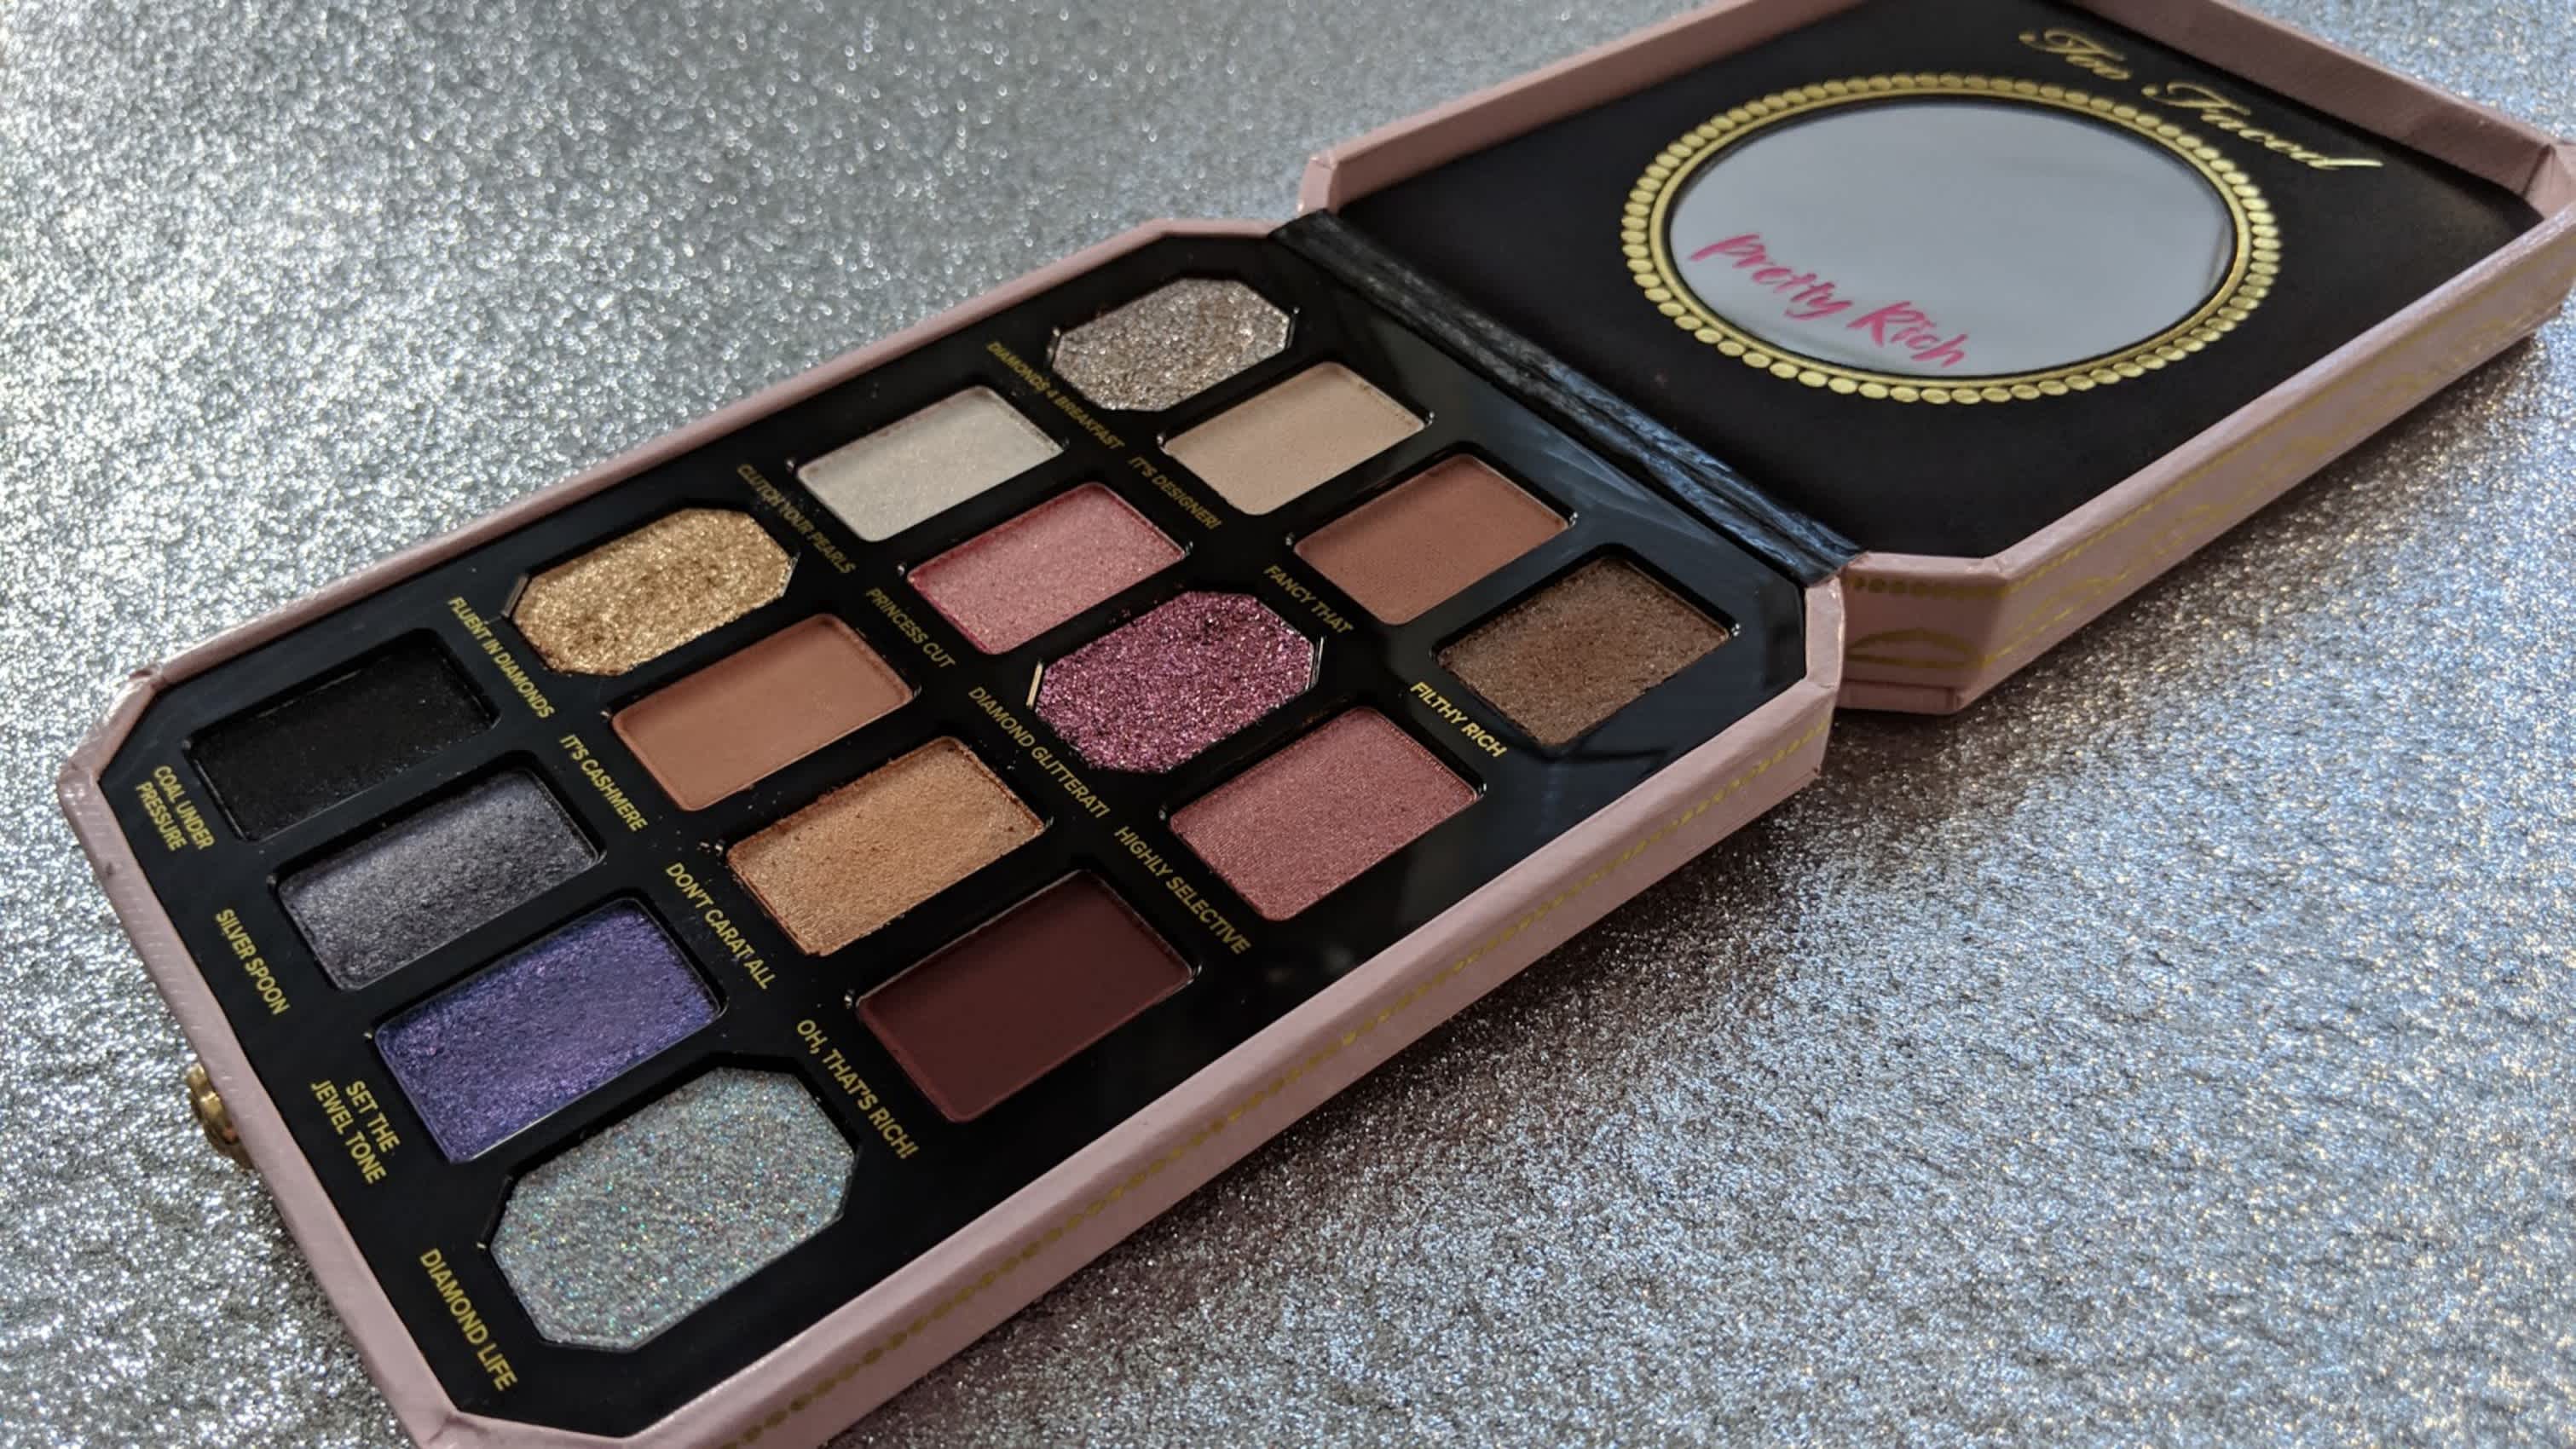 Too Faced Pretty Rich Diamond Light Palette Review and Swatches